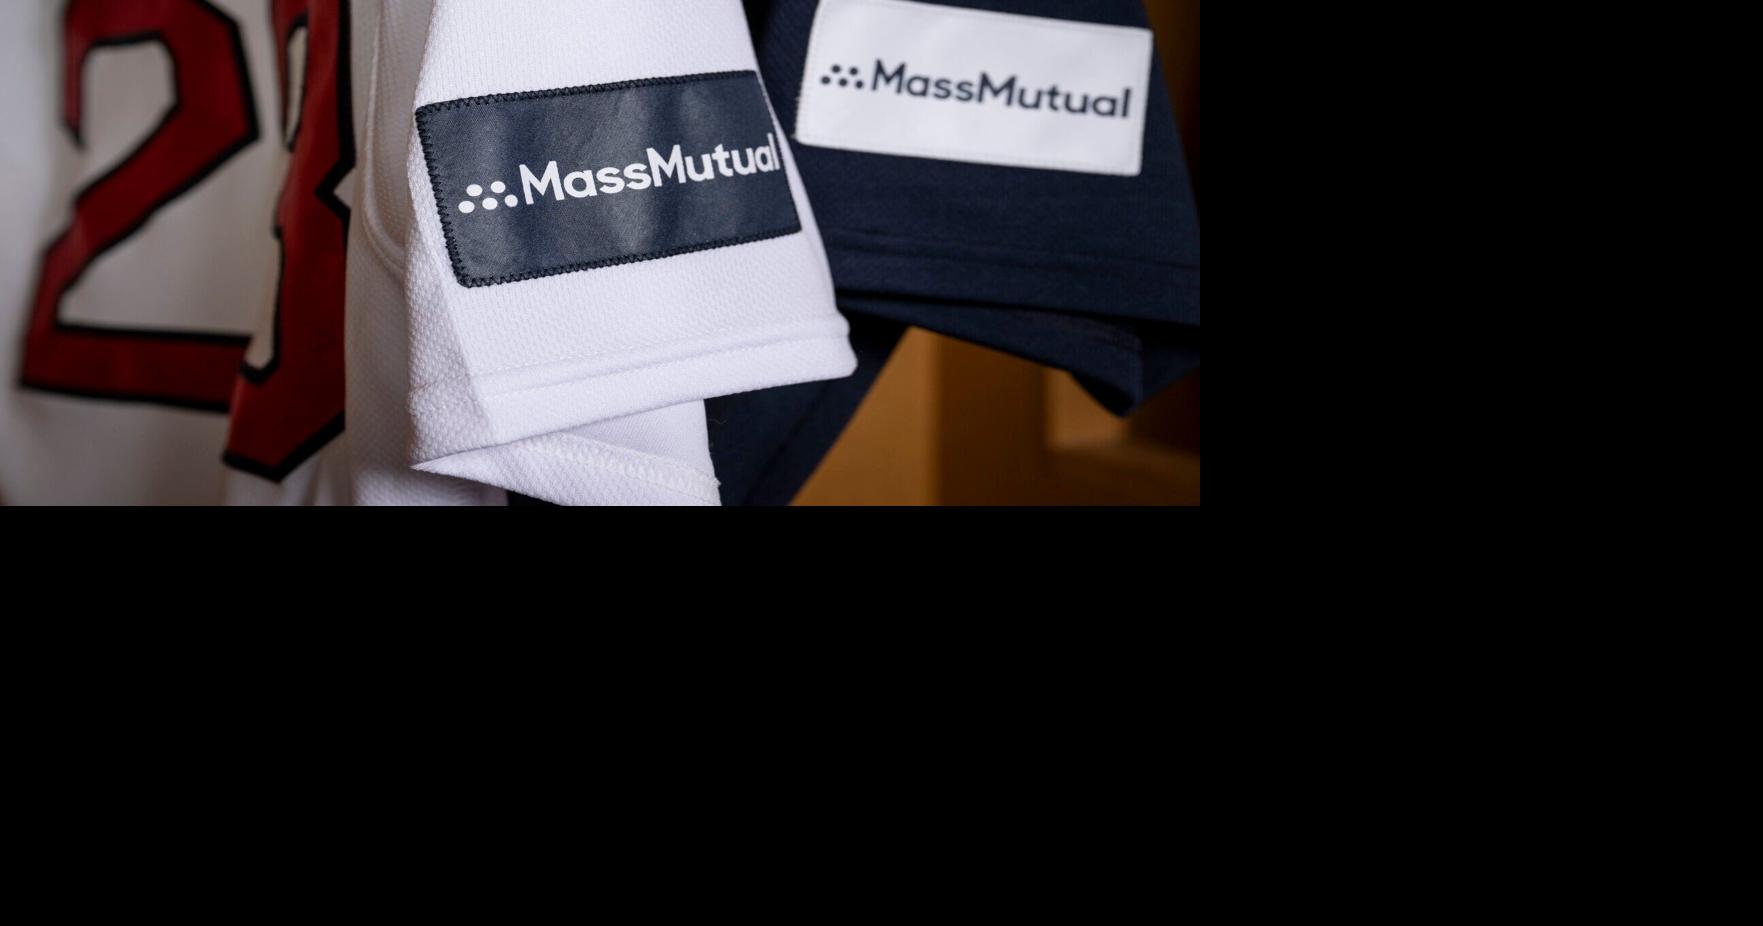 Red Sox debut new uniform advertisements as part of 10-year deal with  MassMutual, Sports